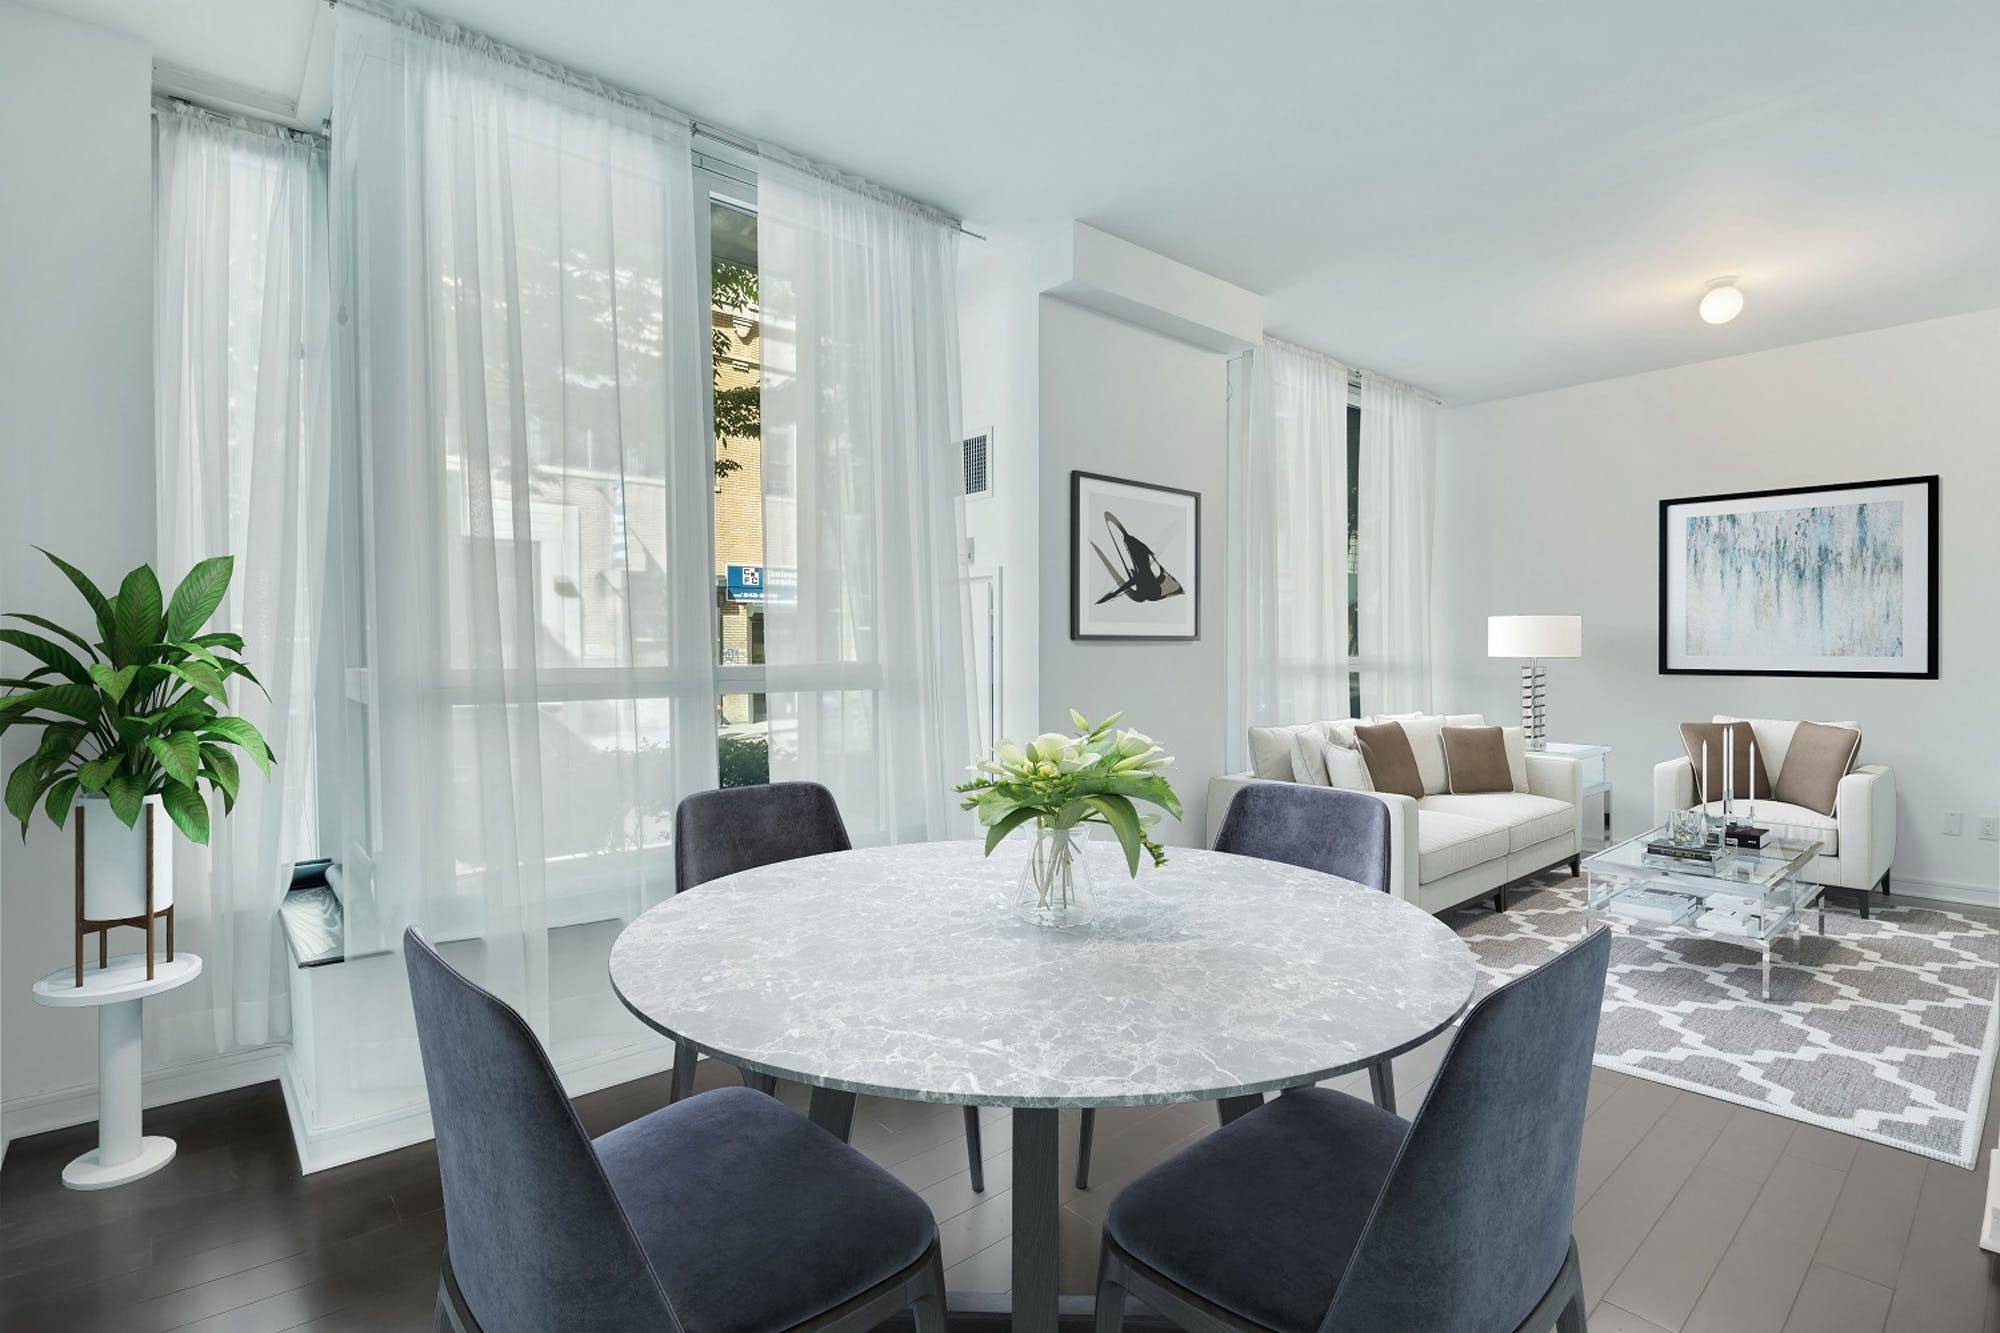 Live in total serenity in this 1, 374 SF loft style duplex in the heart of Chelsea.